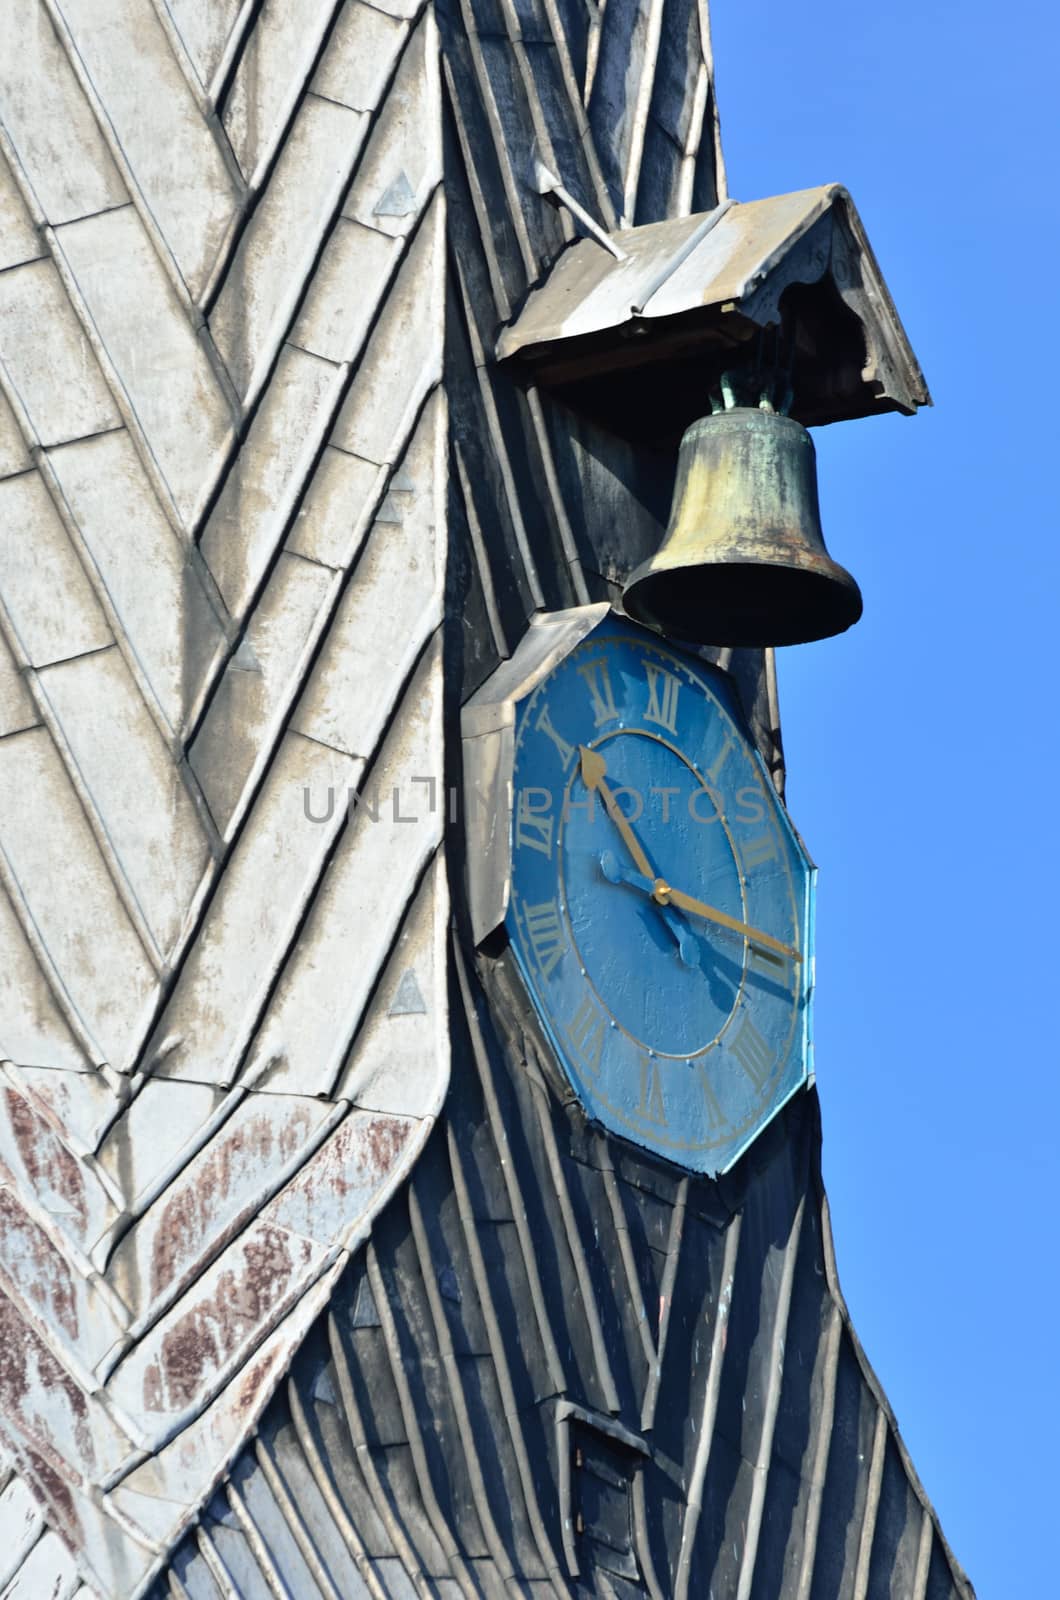 Bell and clock in close up